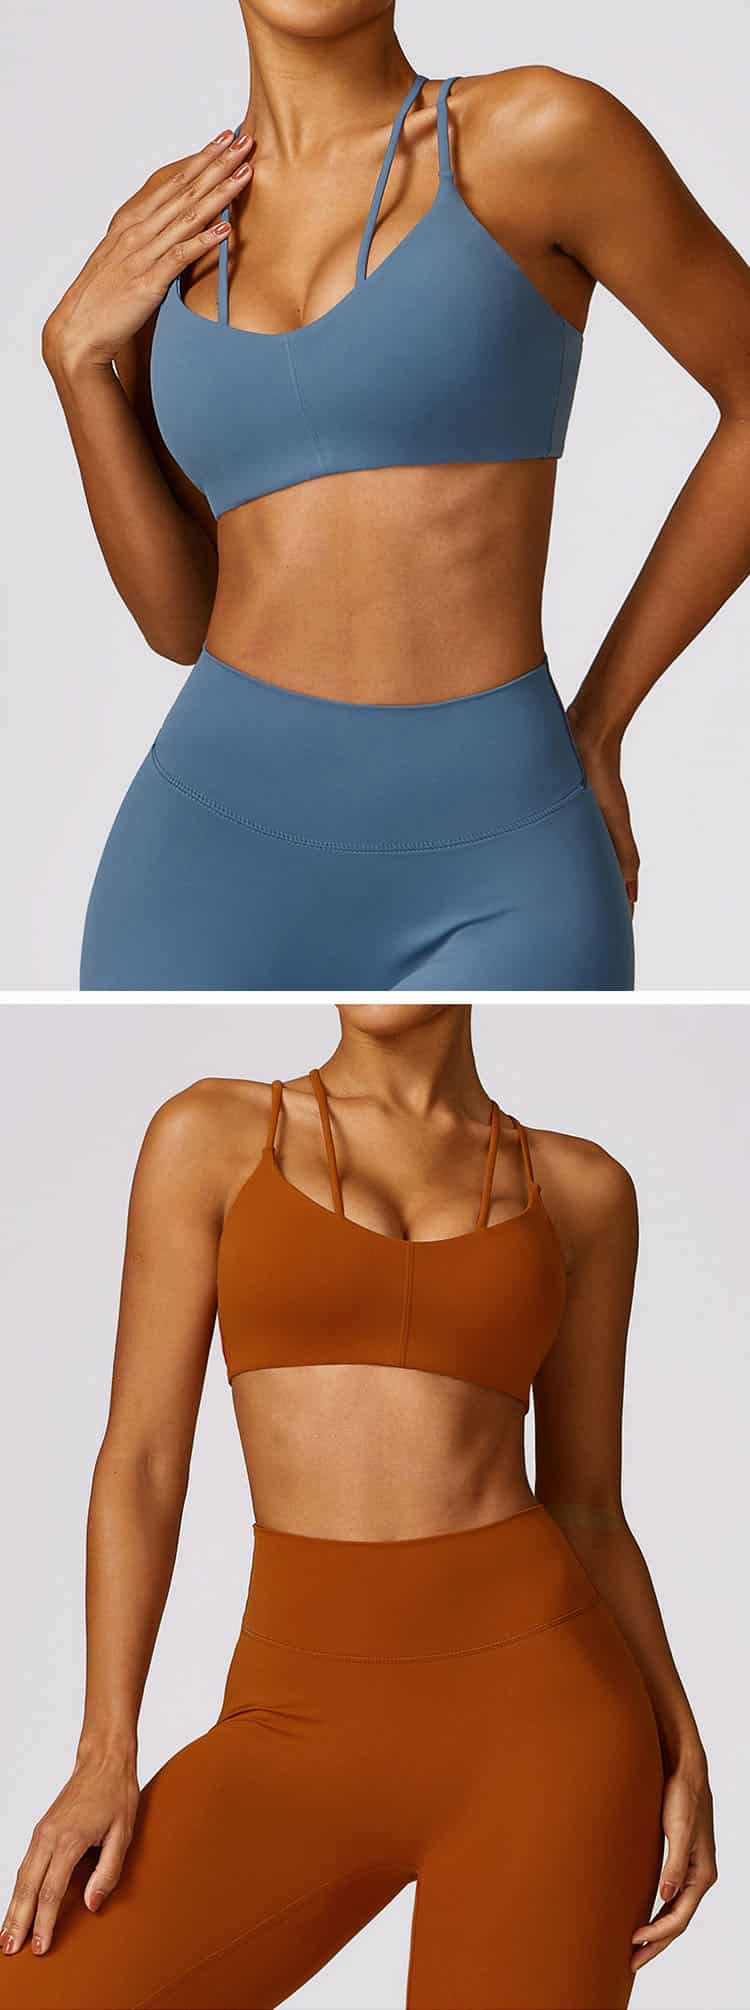 Sling design is adopted to help lift the chest shape and show sexy chest